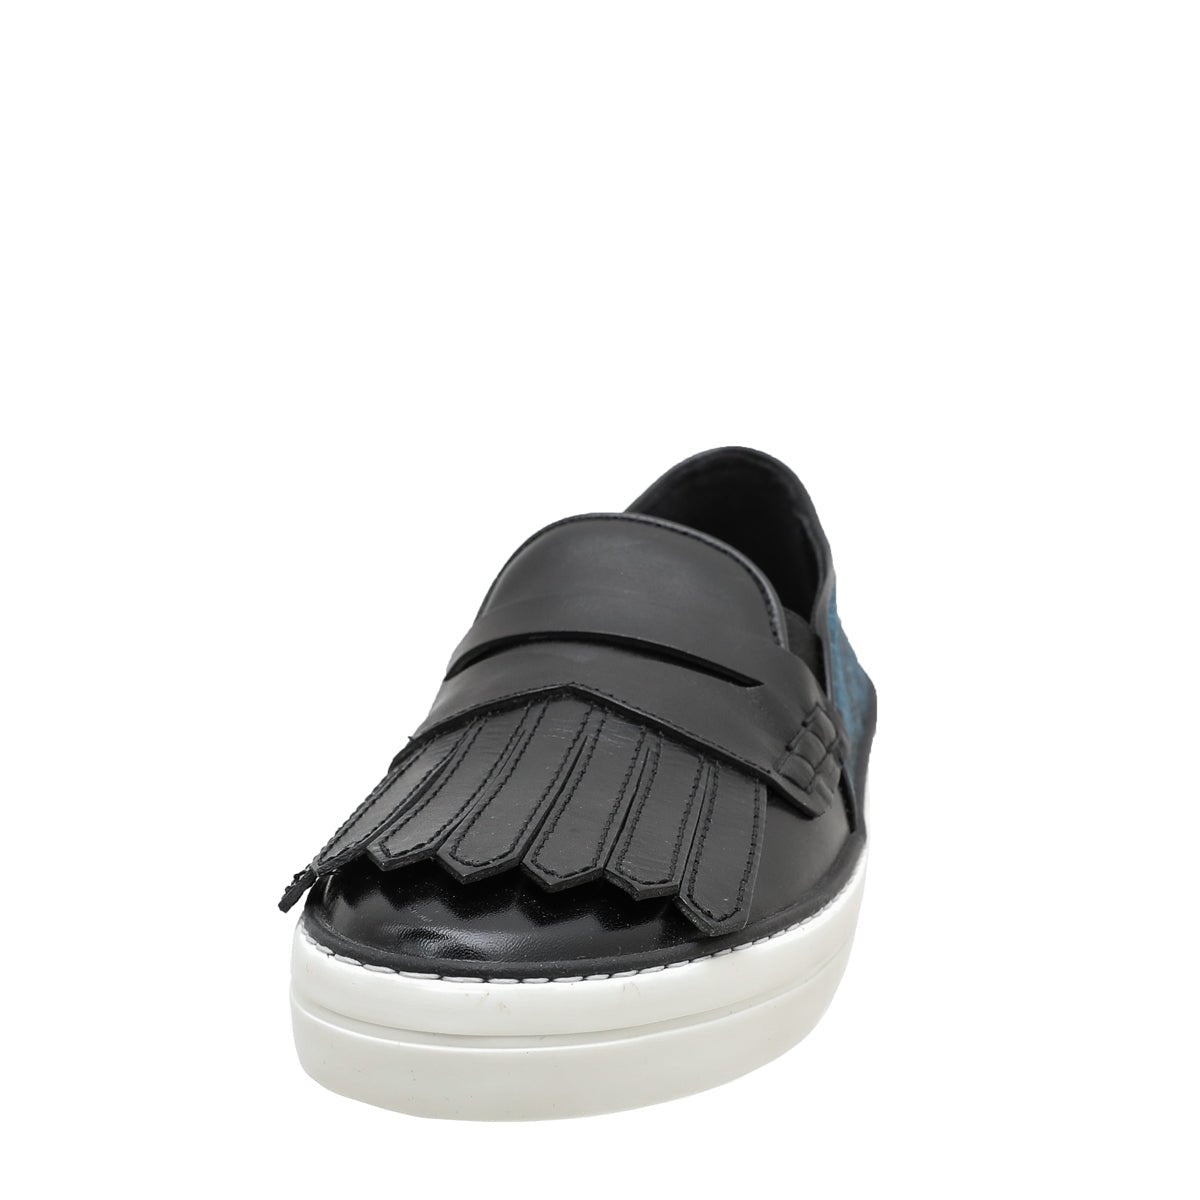 Burberry - Burberry Bicolor Fringe Penny Slip on Sneakers 39 | The Closet